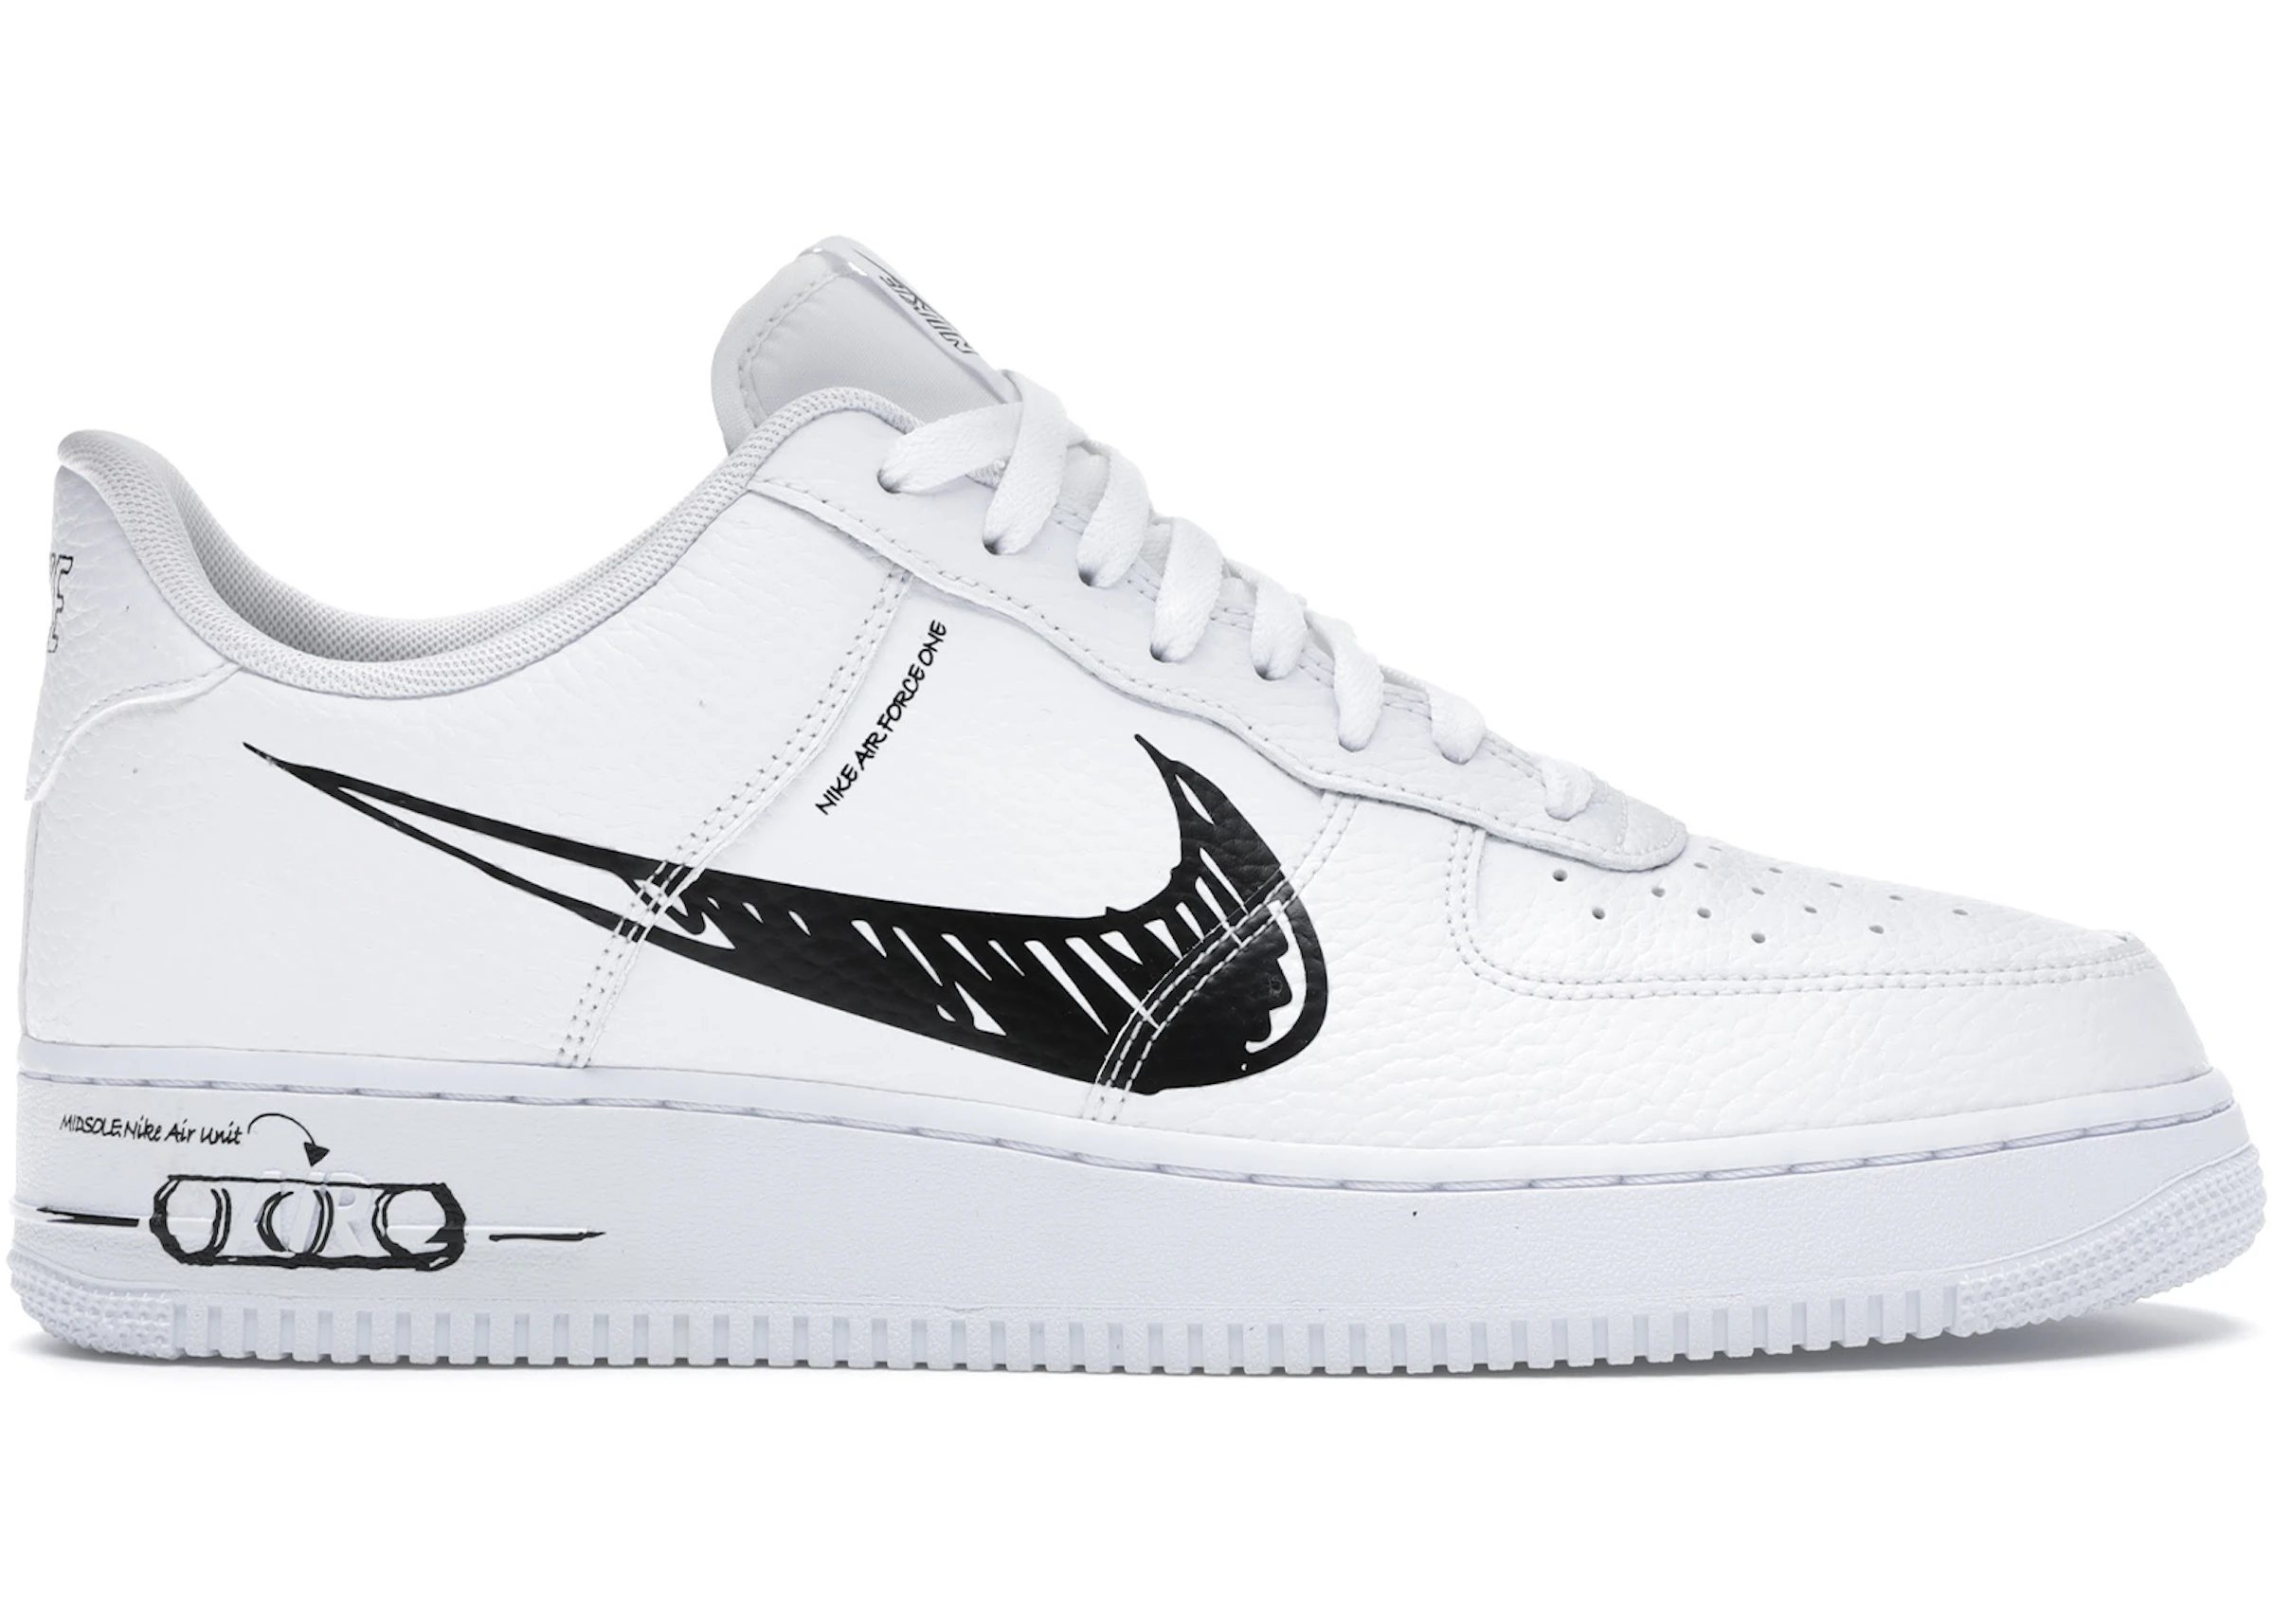 secretly Specialty complications Nike Air Force 1 Low Sketch White Black - CW7581-101 - US